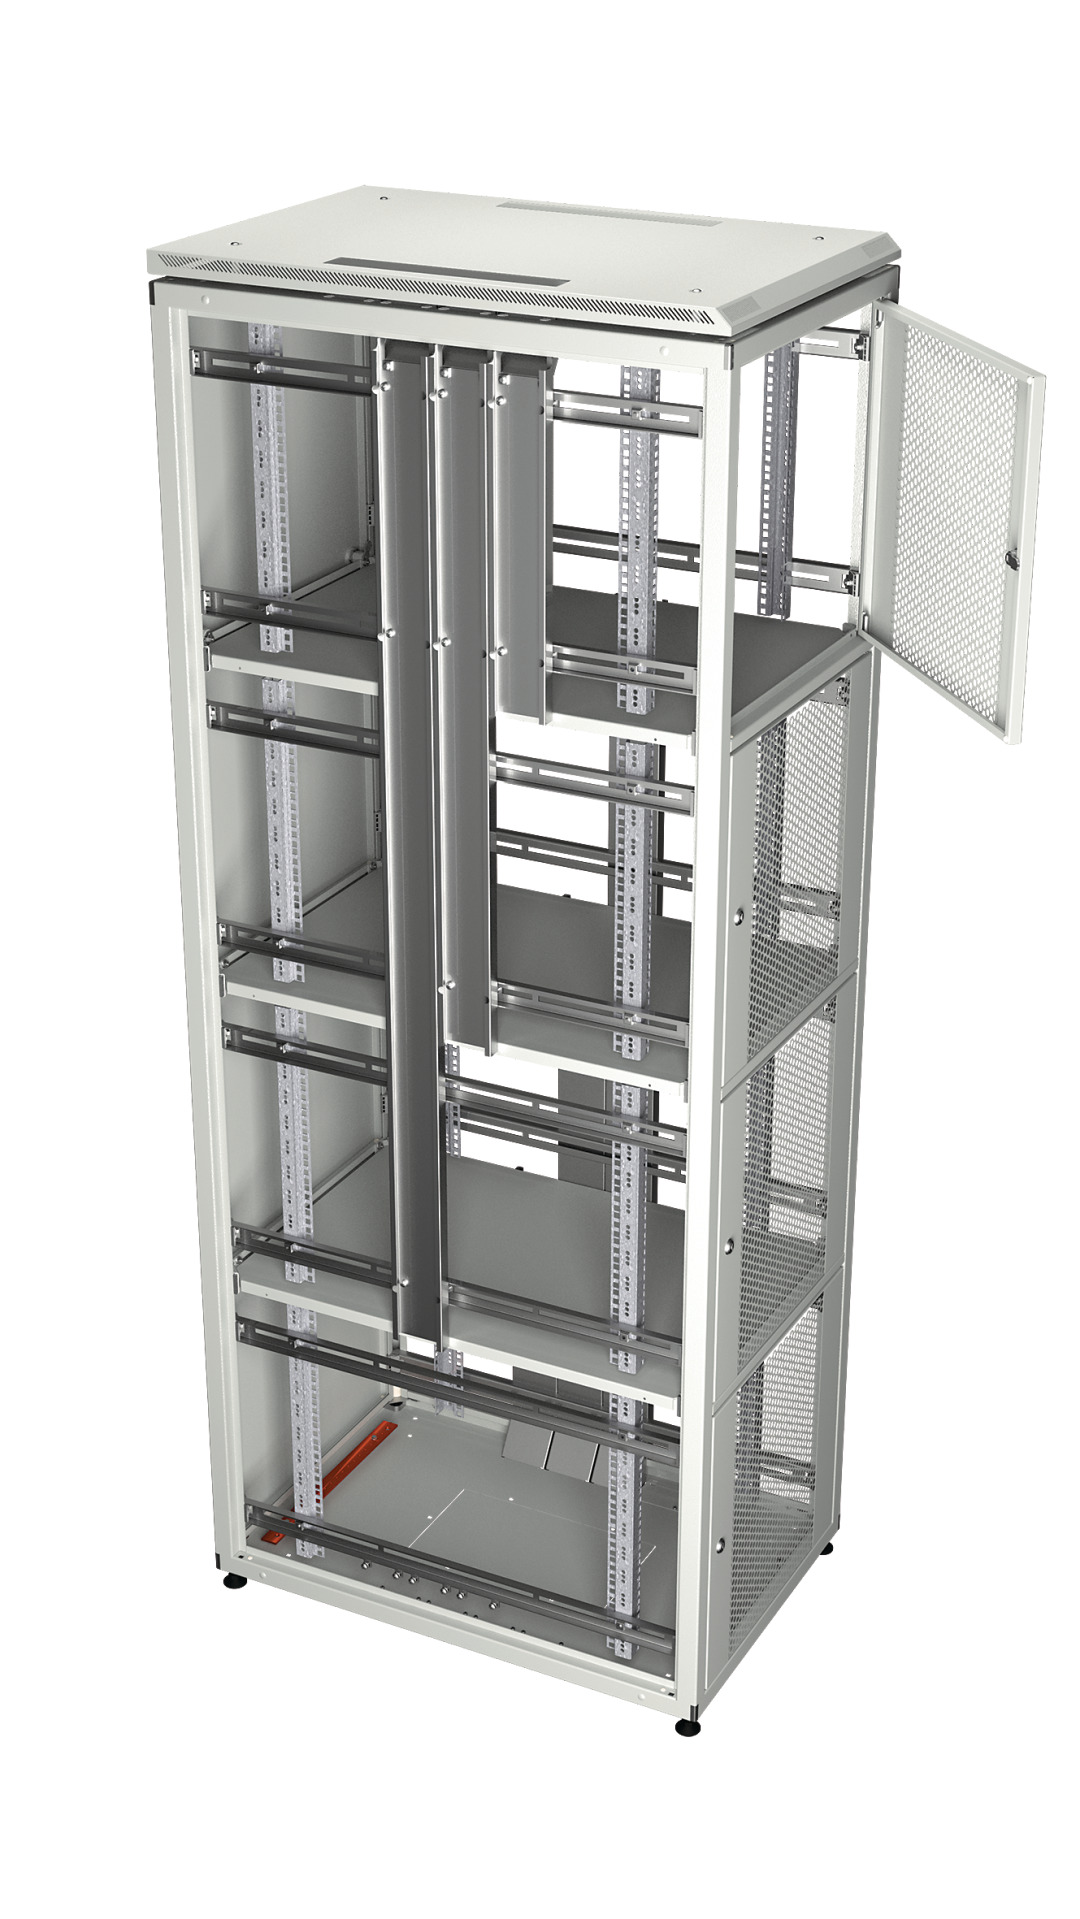 Co-Location Rack PRO, 2 x 20U, 600x1000 mm, F+R 1-Part Perforated, RAL9005